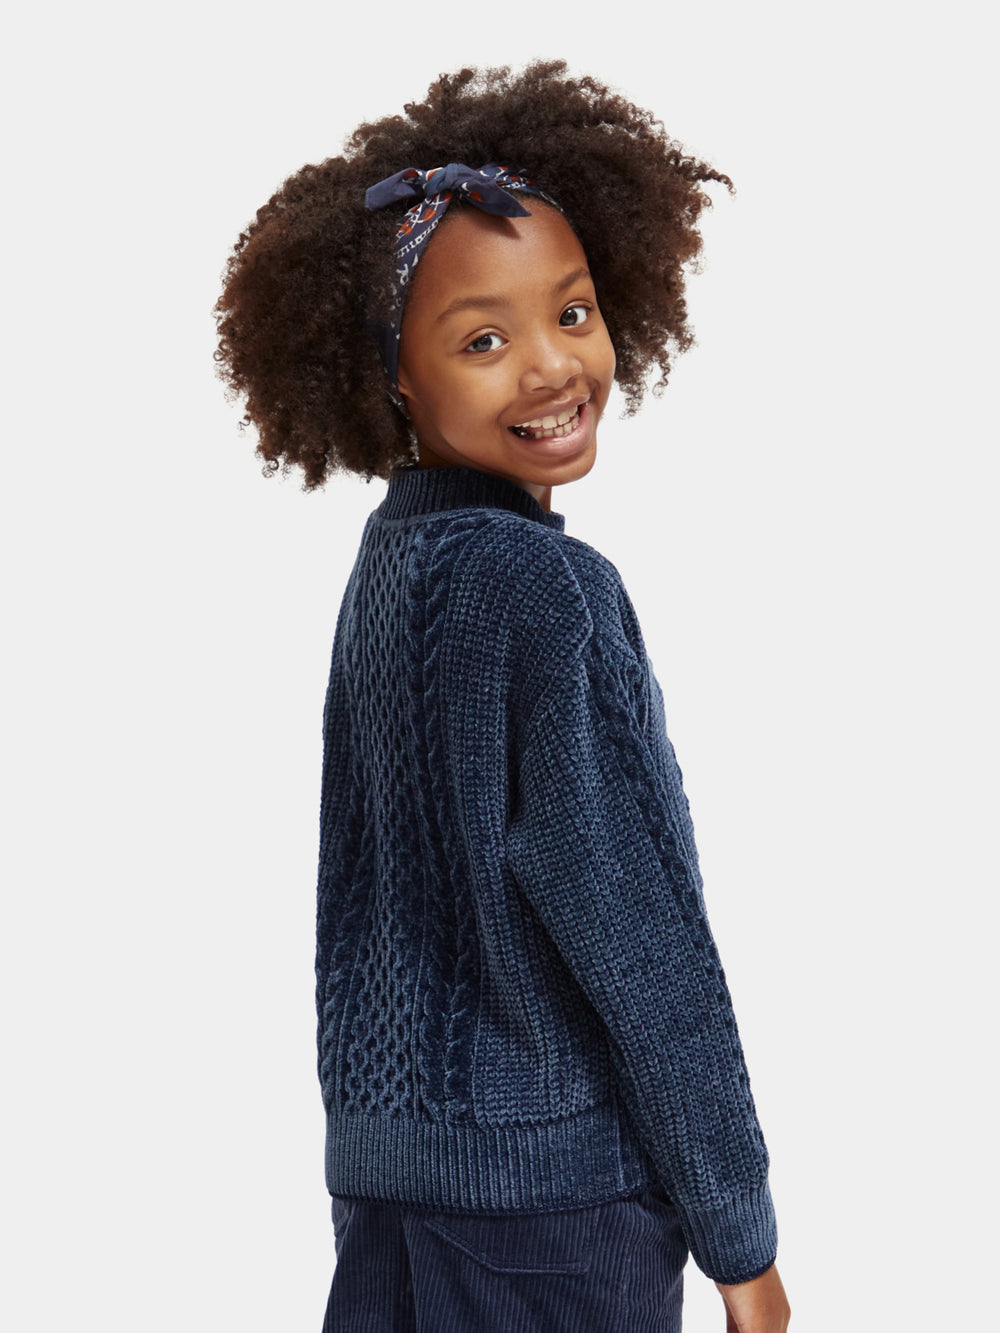 Kids - Chenille cable knit pullover - Scotch & Soda NZ